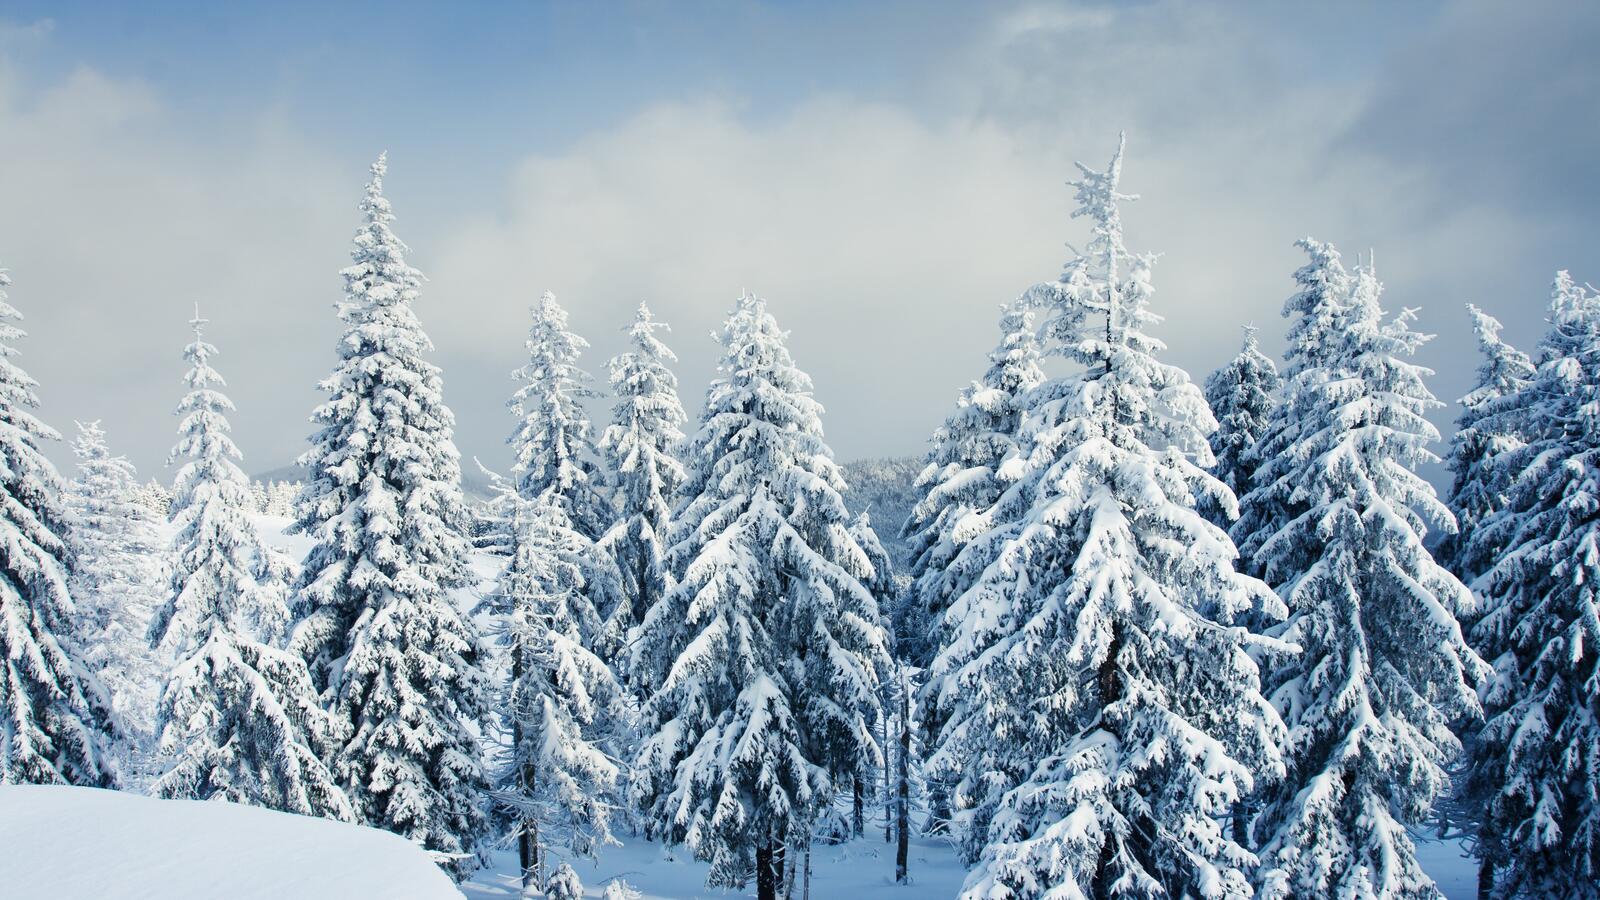 Wallpapers Christmas trees in snow snow winter landscape on the desktop